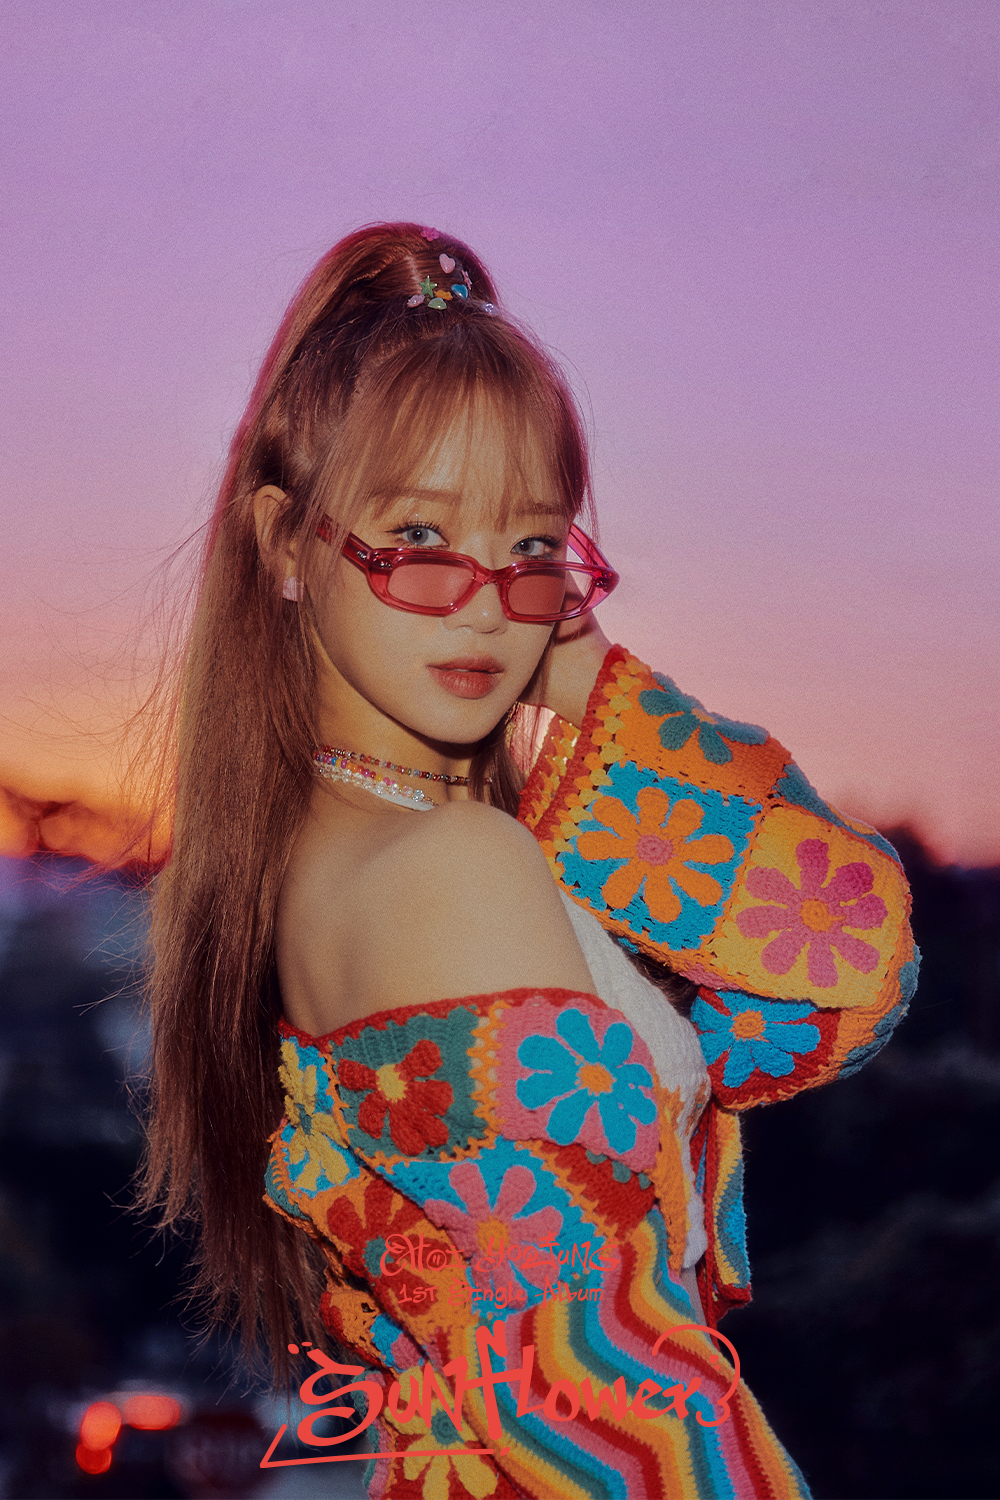 'Solo Debut' Yoojung, 'Sunflower' concept photo released... cool visual